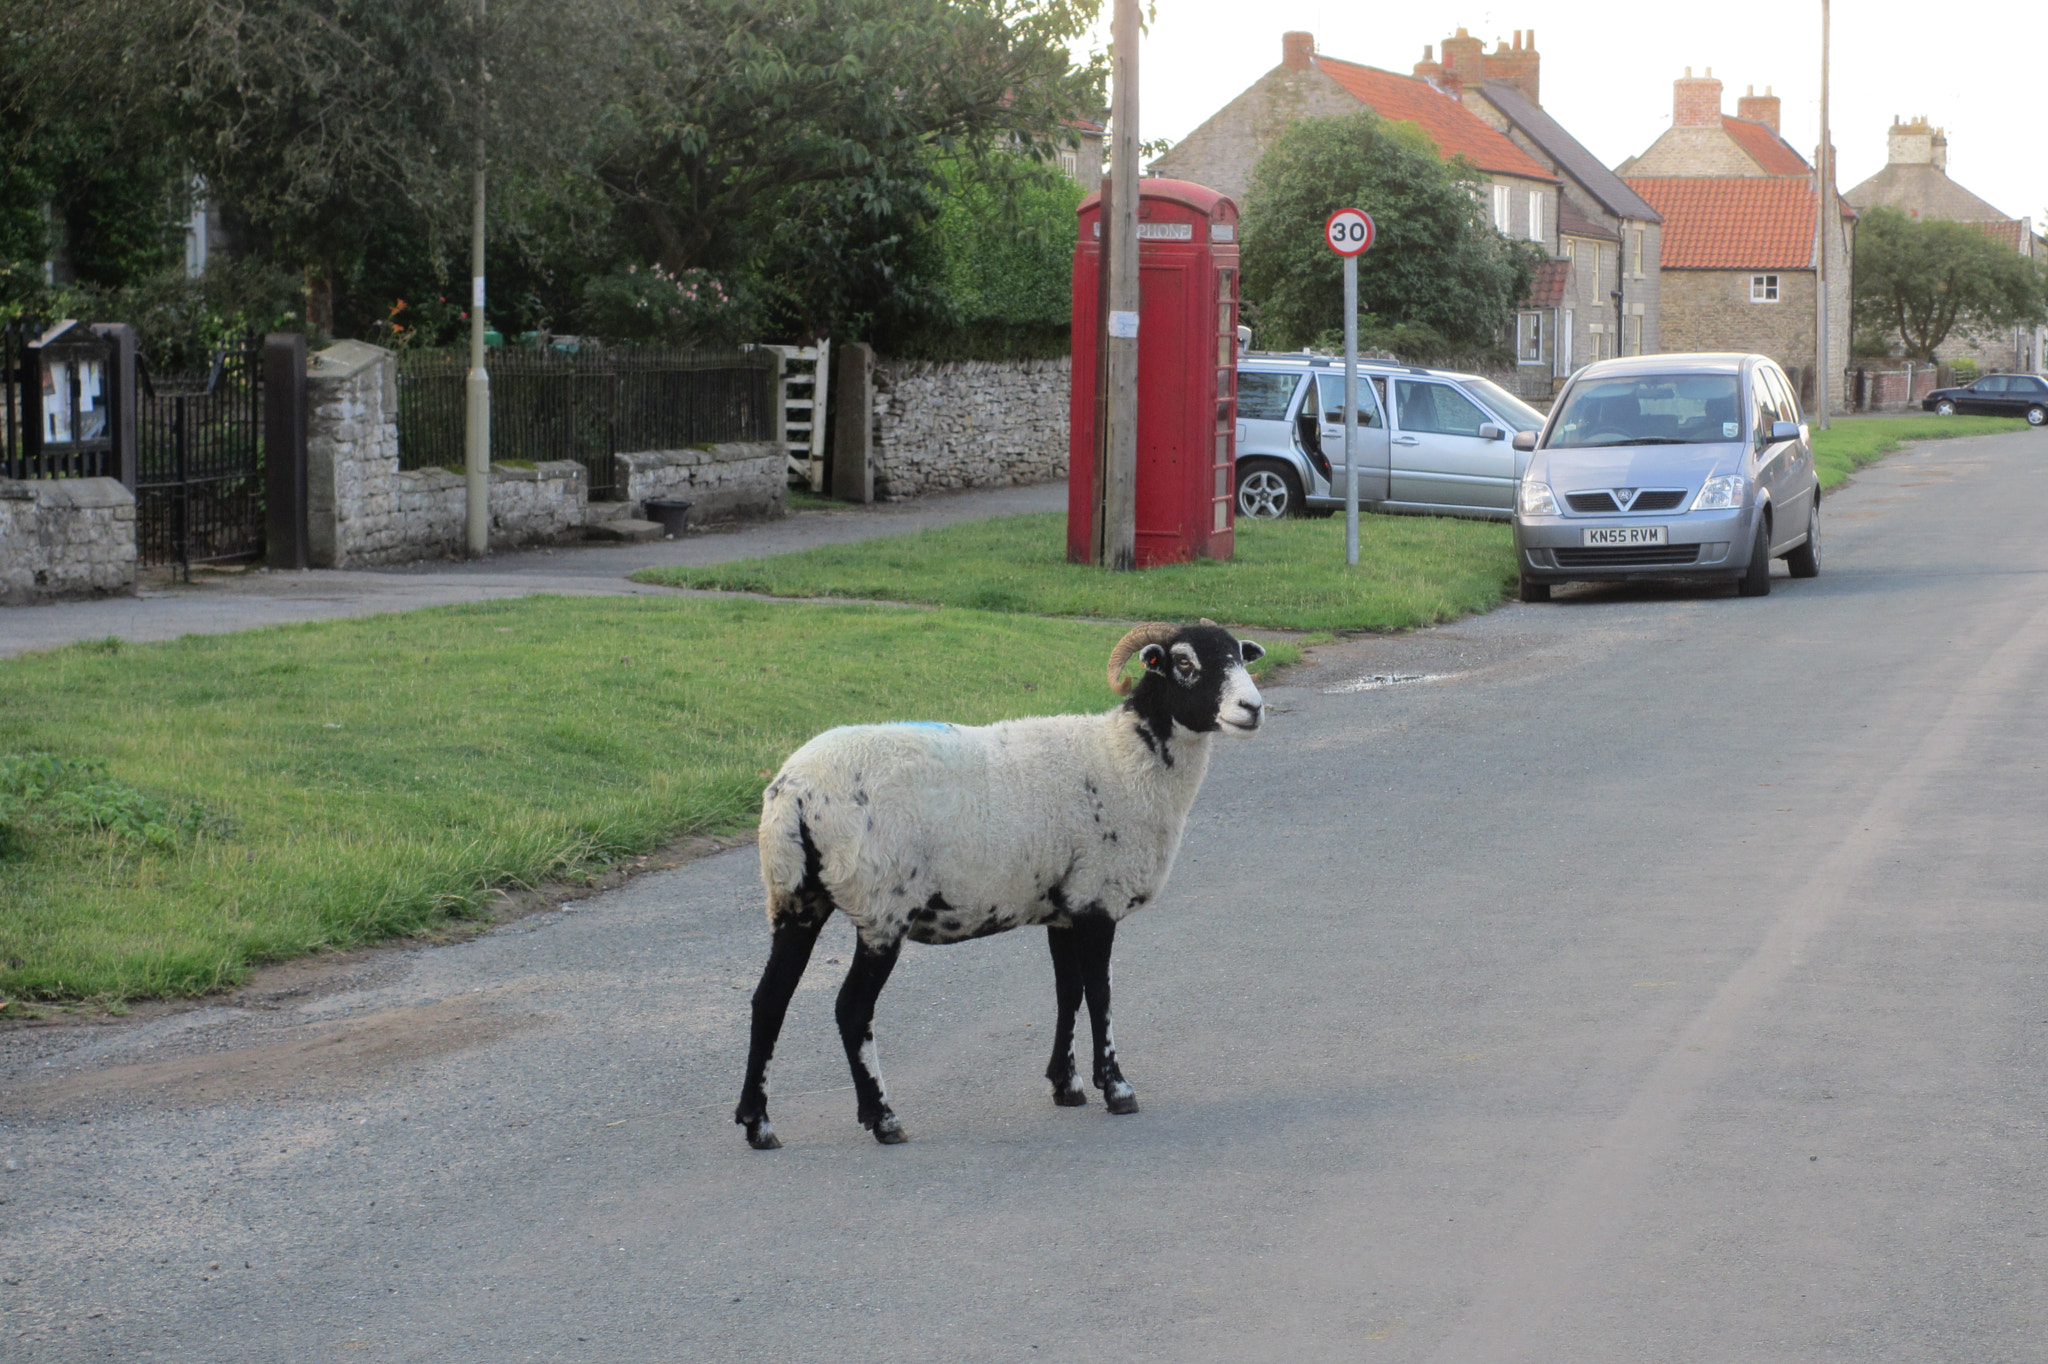 Canon PowerShot ELPH 310 HS (IXUS 230 HS / IXY 600F) sample photo. Sheep in a village in the northyorck moores photography